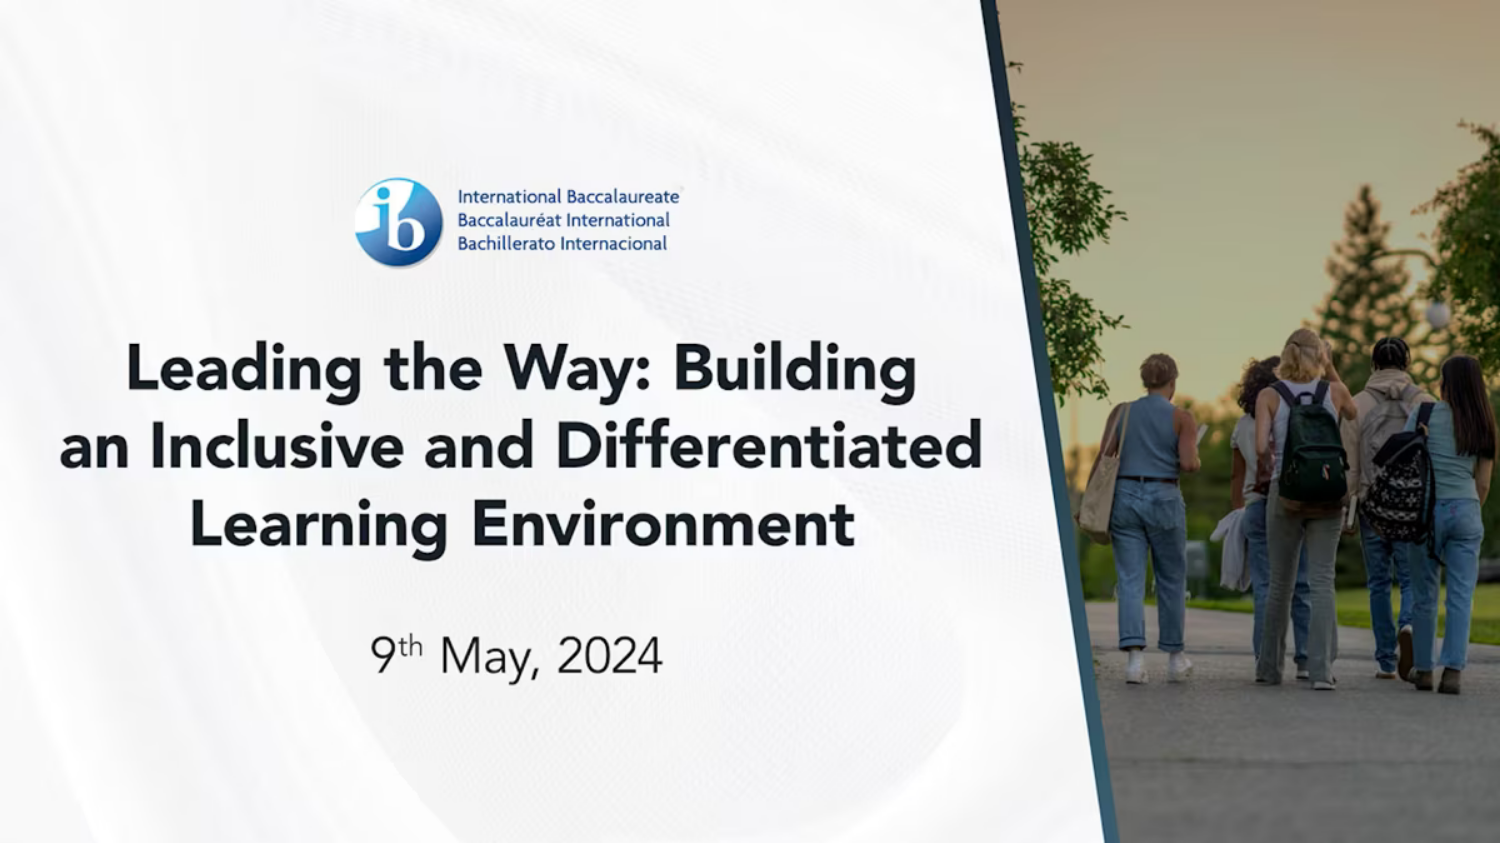 Leading the Way: Building an Inclusive and Differentiated Learning Environment